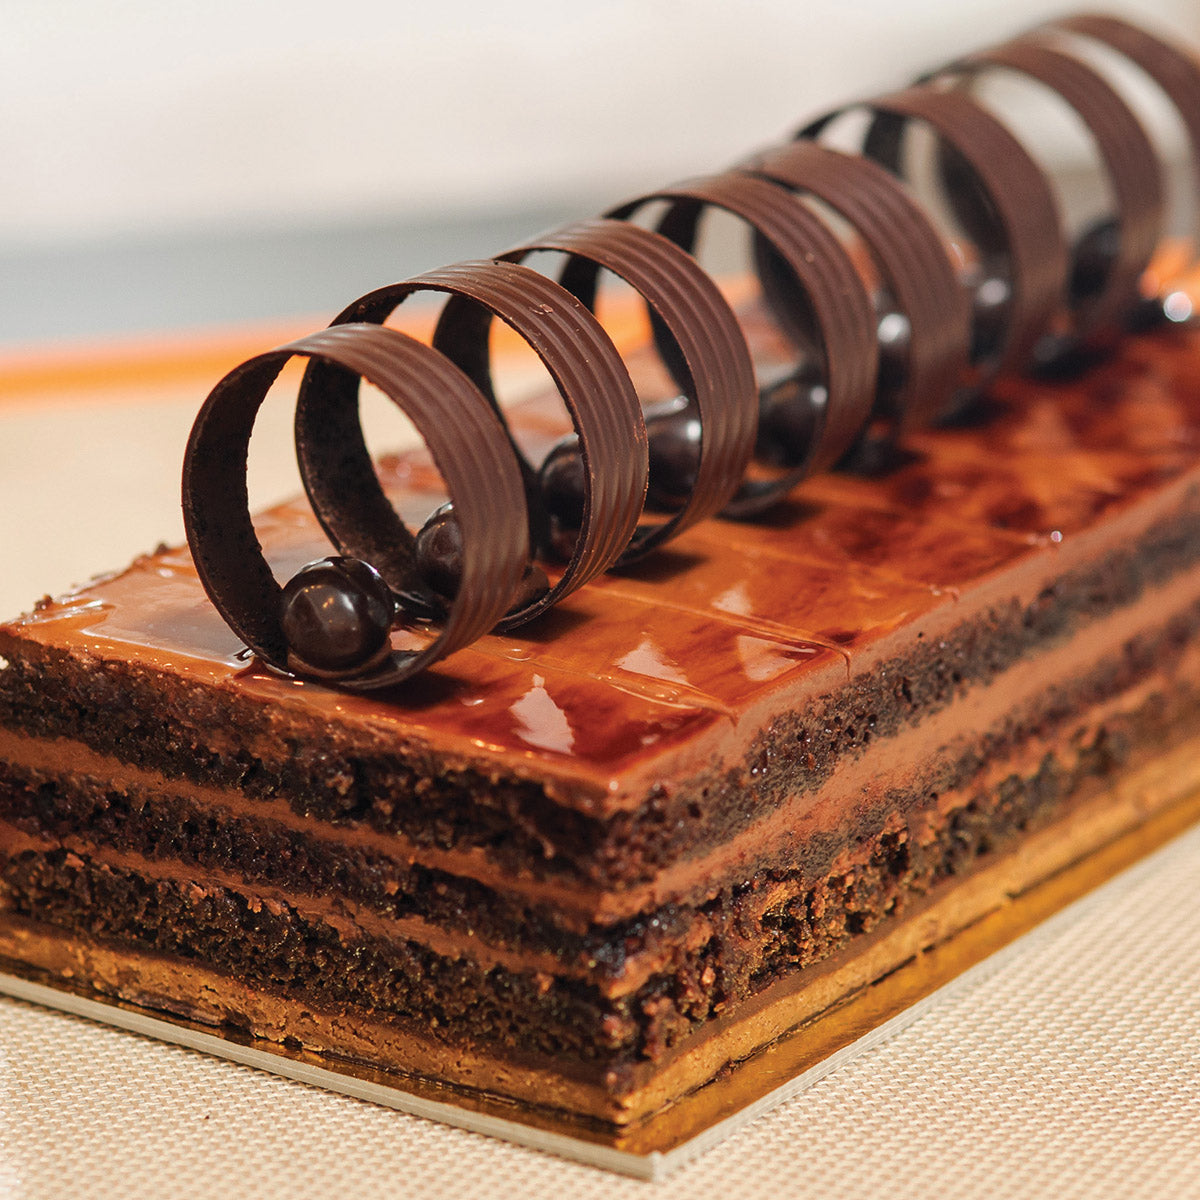 Chocolate Epresso Pave with layers of crunchy praline and an espresso flavored glaze